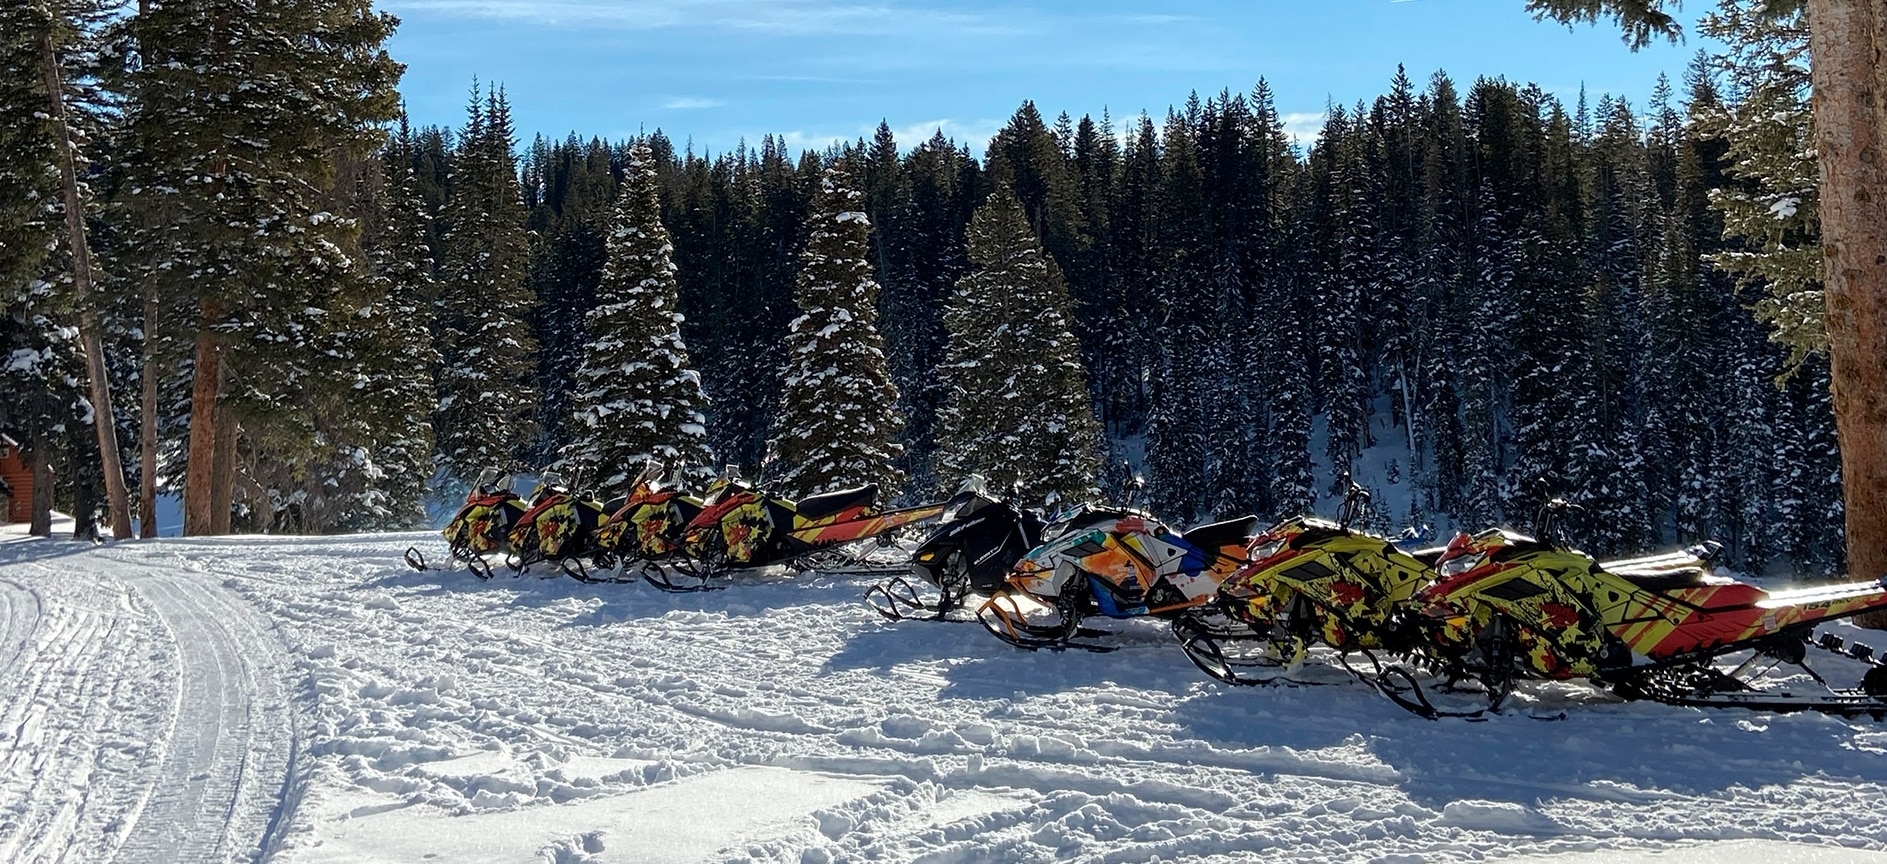 Ski-Doo sleds lined up in the snow